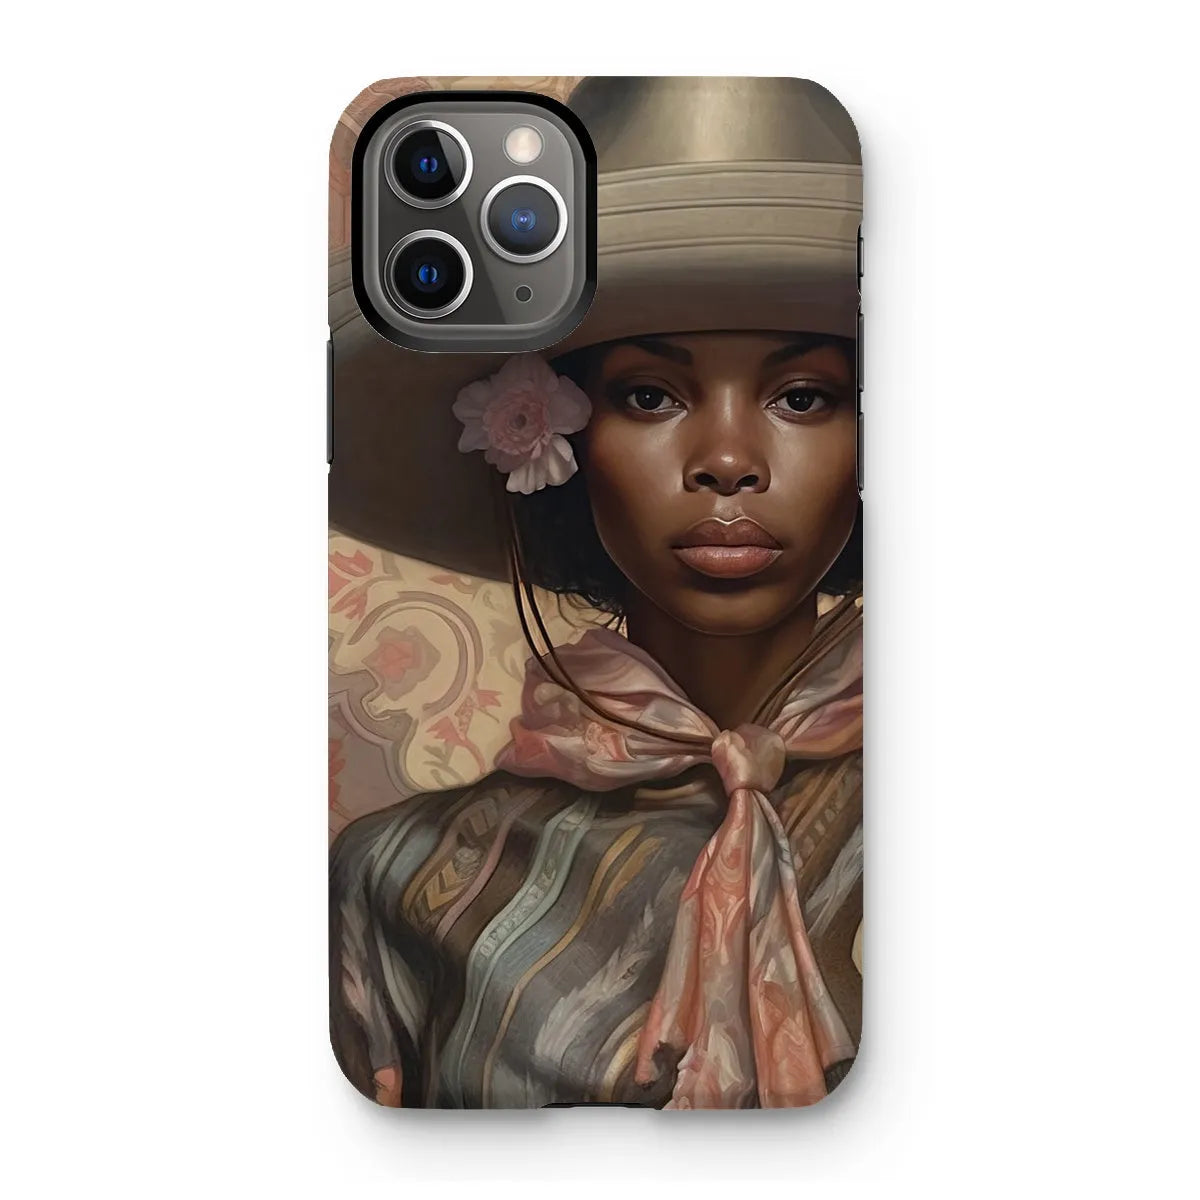 Sadie The Lesbian Cowgirl - Sapphic Art Phone Case - Iphone 11 Pro / Matte - Mobile Phone Cases - Aesthetic Art